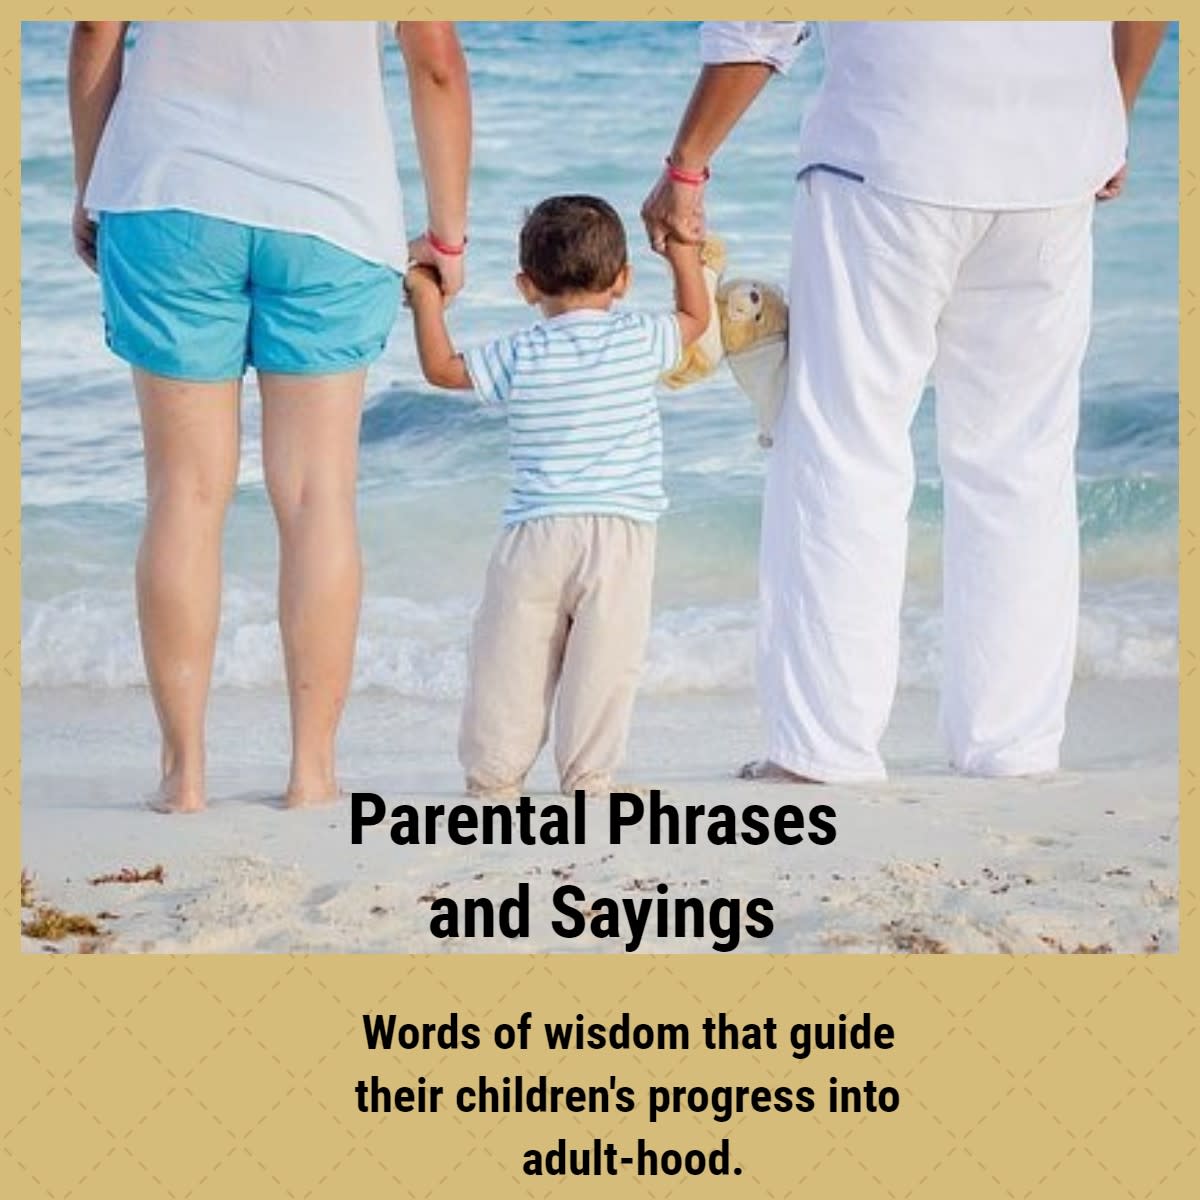 Parental Phrases and Sayings